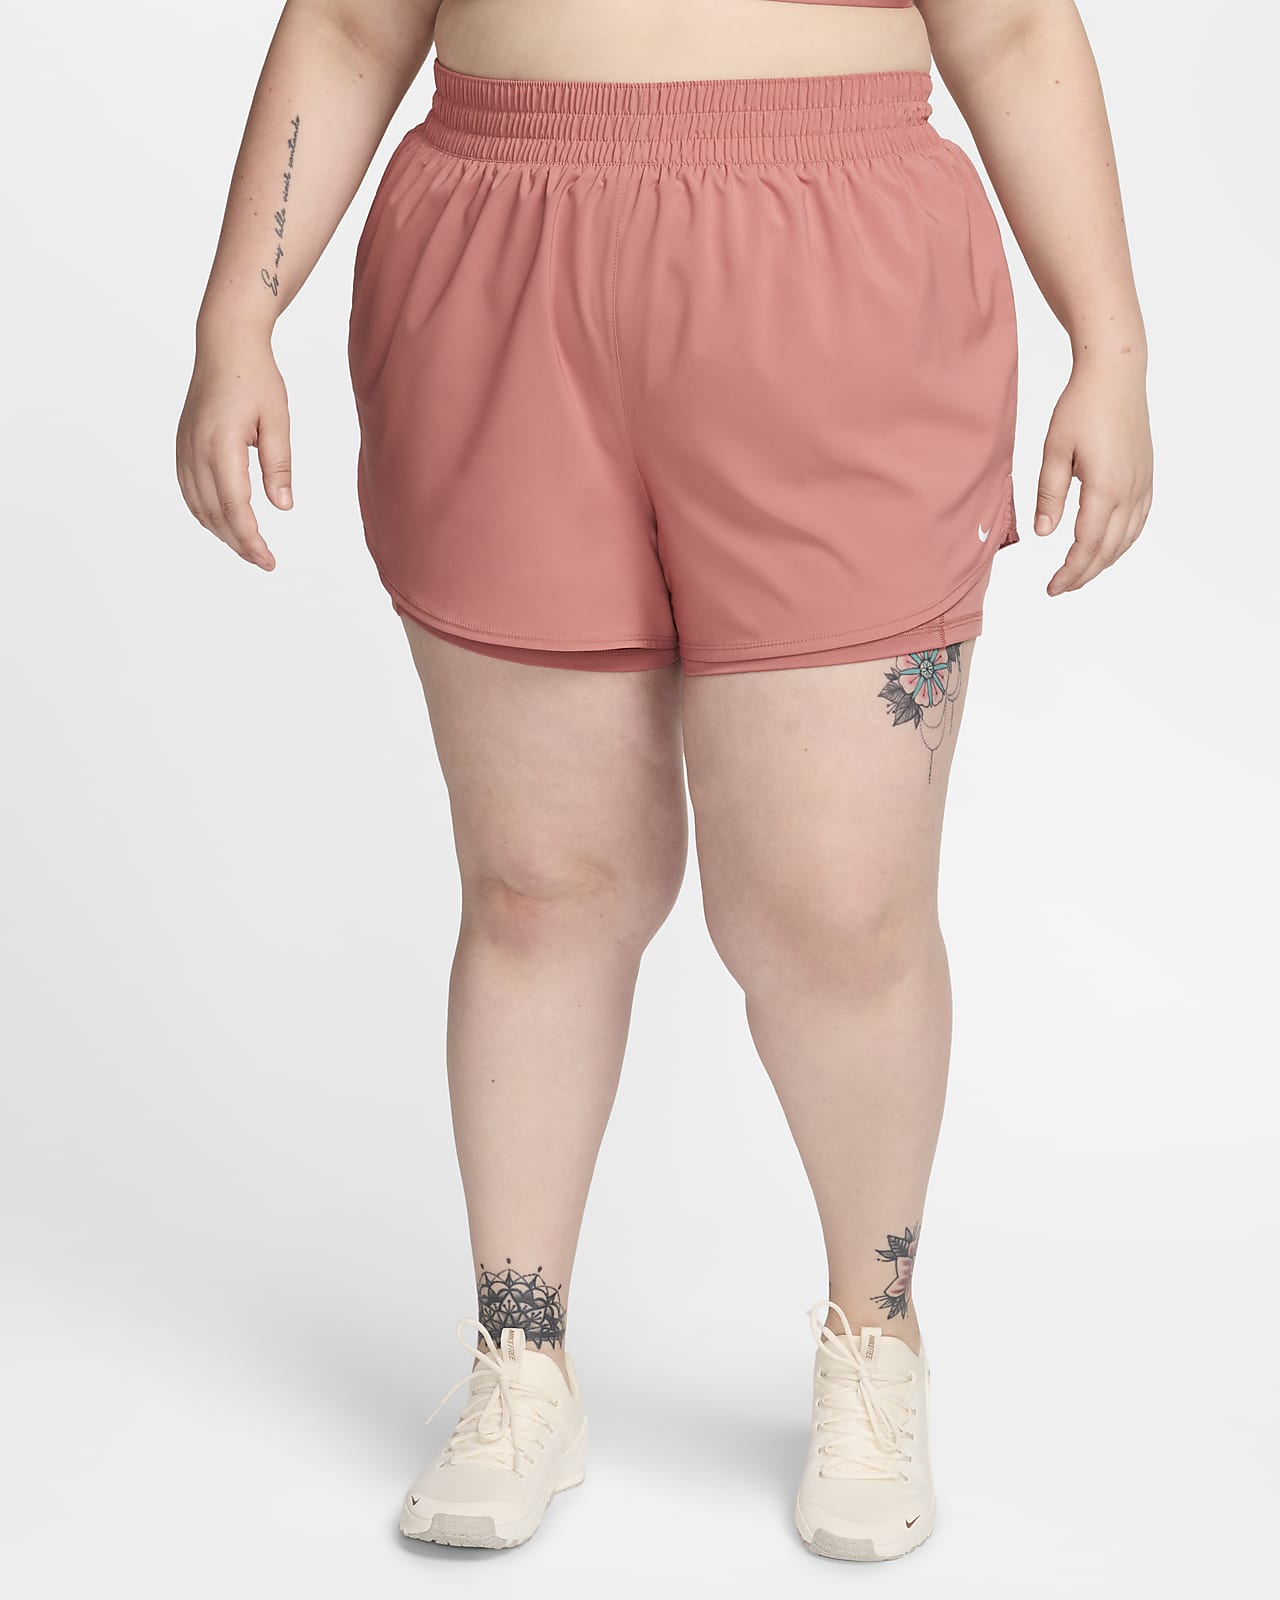 Nike Dri-FIT One Women's High-Waisted 3" 2-in-1 Shorts (Plus Size)